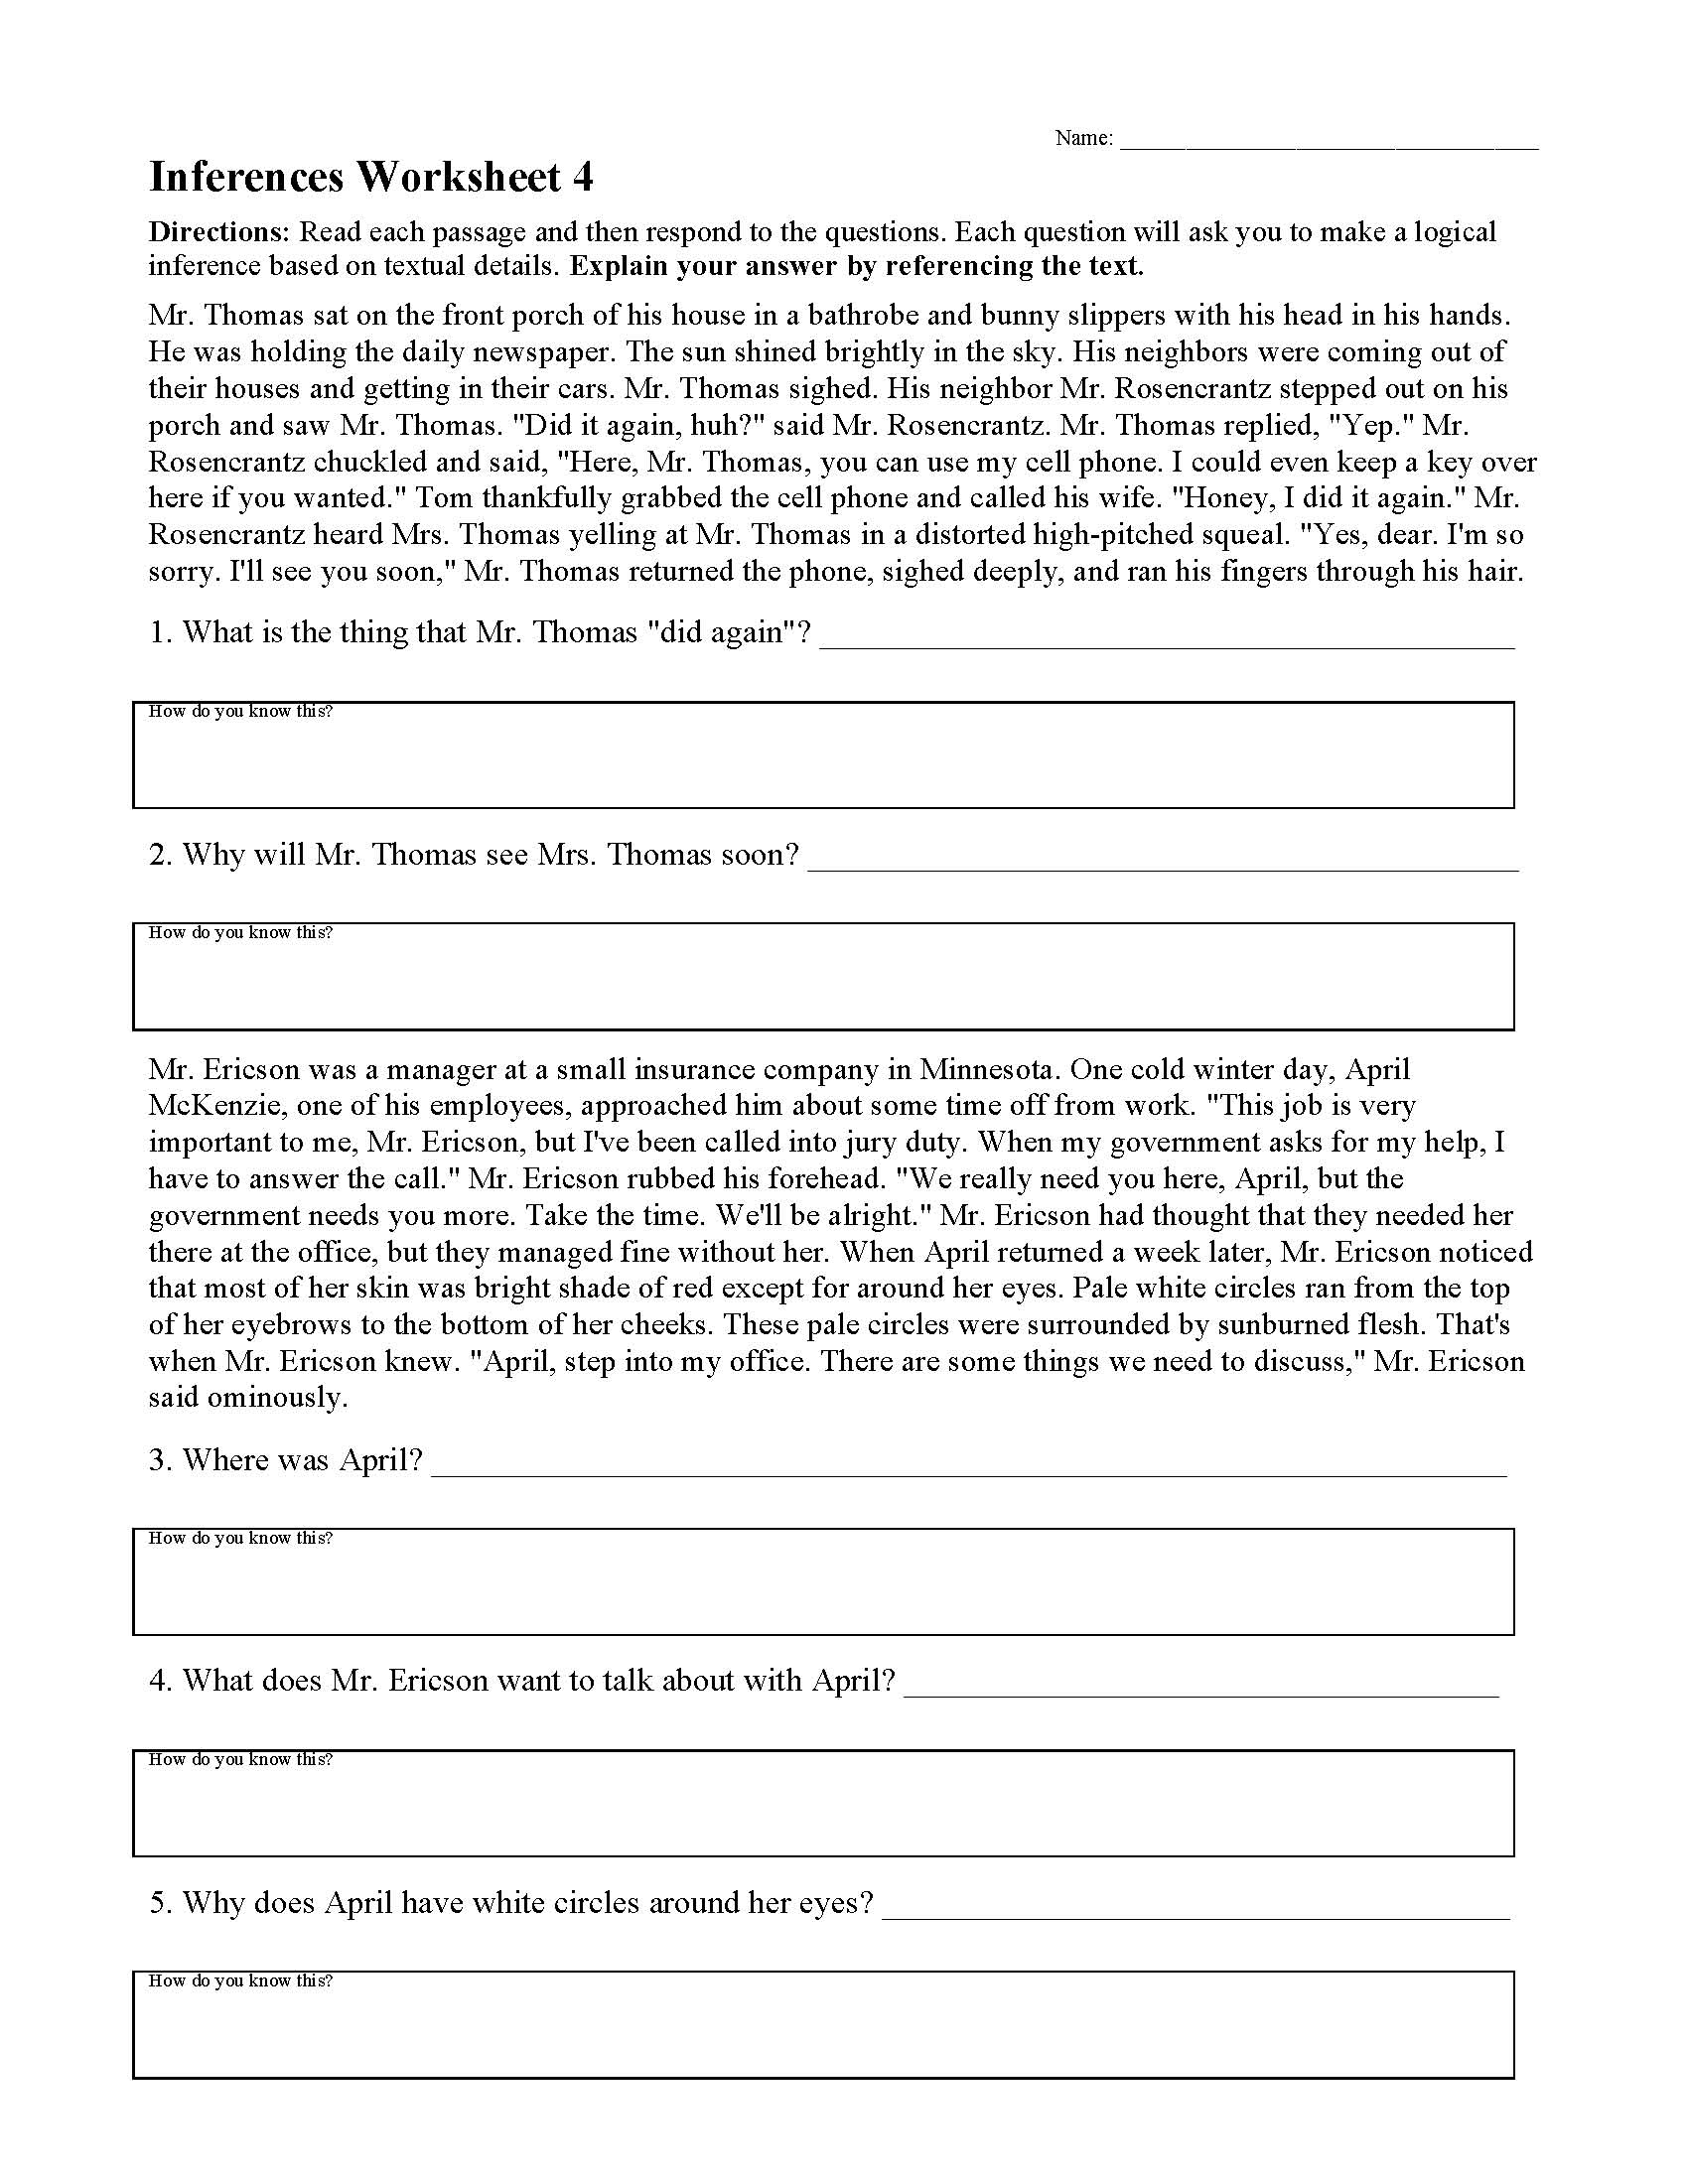 Inferences Worksheet 4 Reading Activity